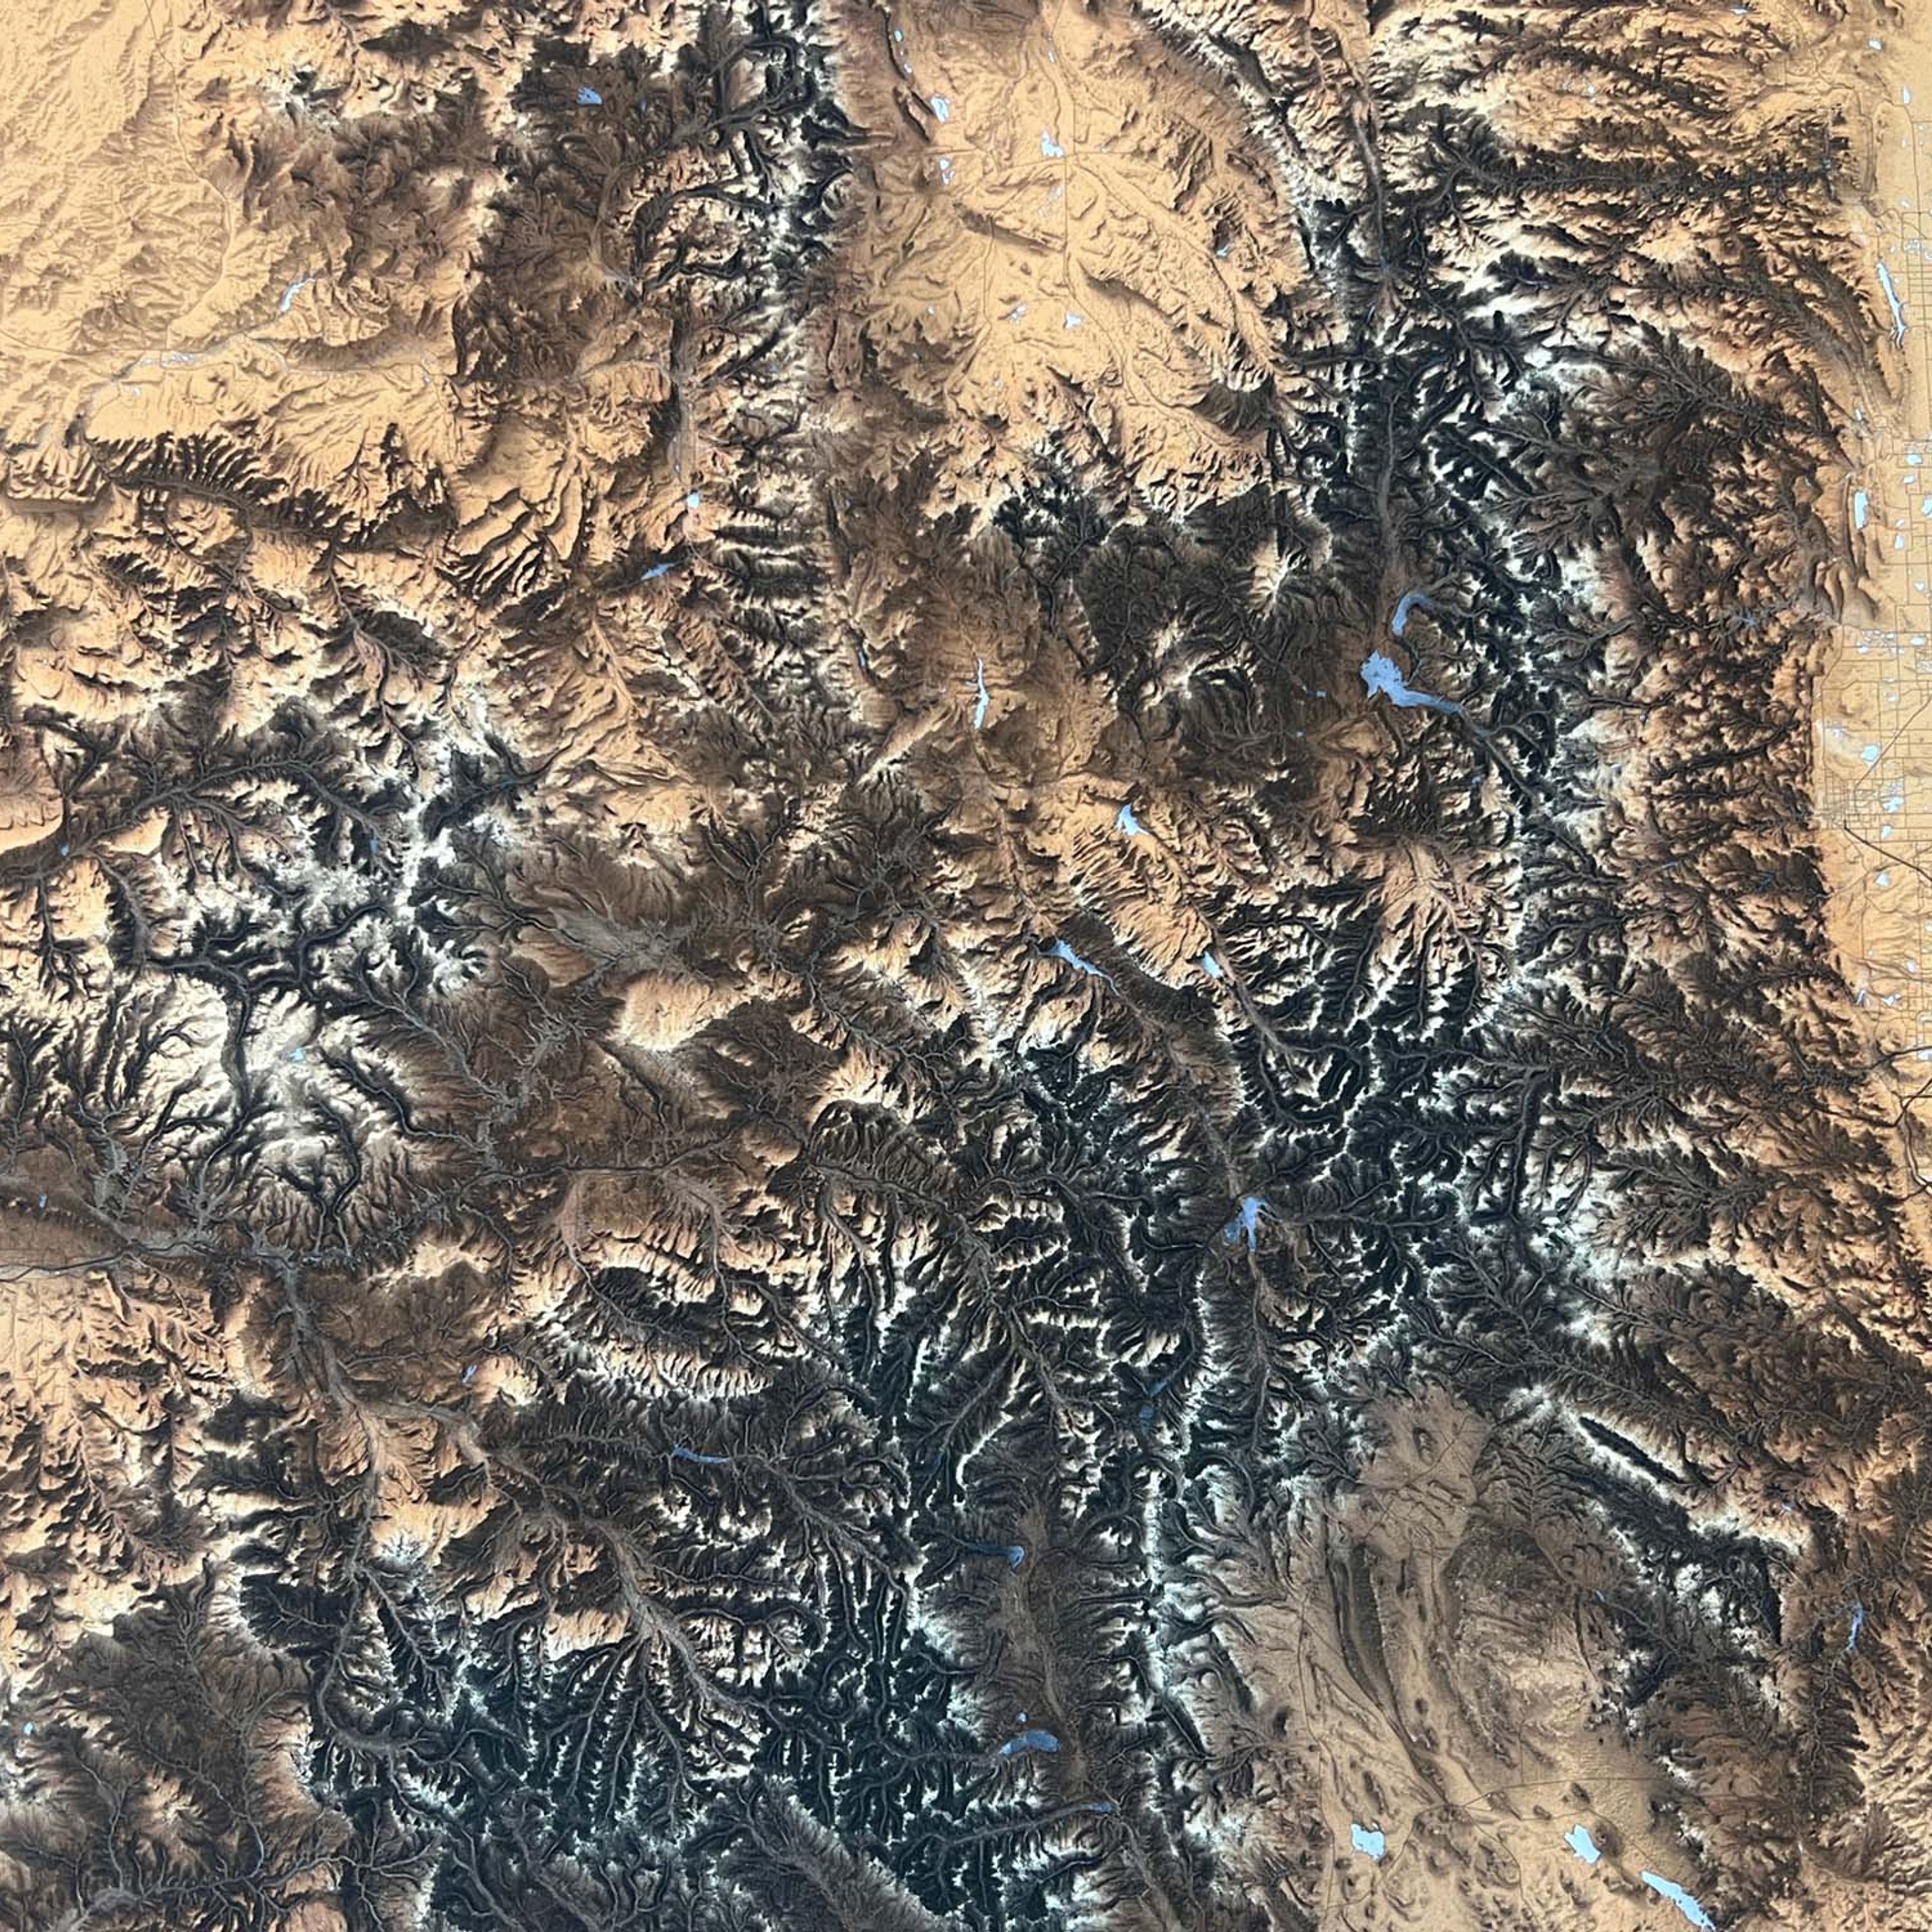 Colorado Map - Topographic Elevation Map with Shaded Relief